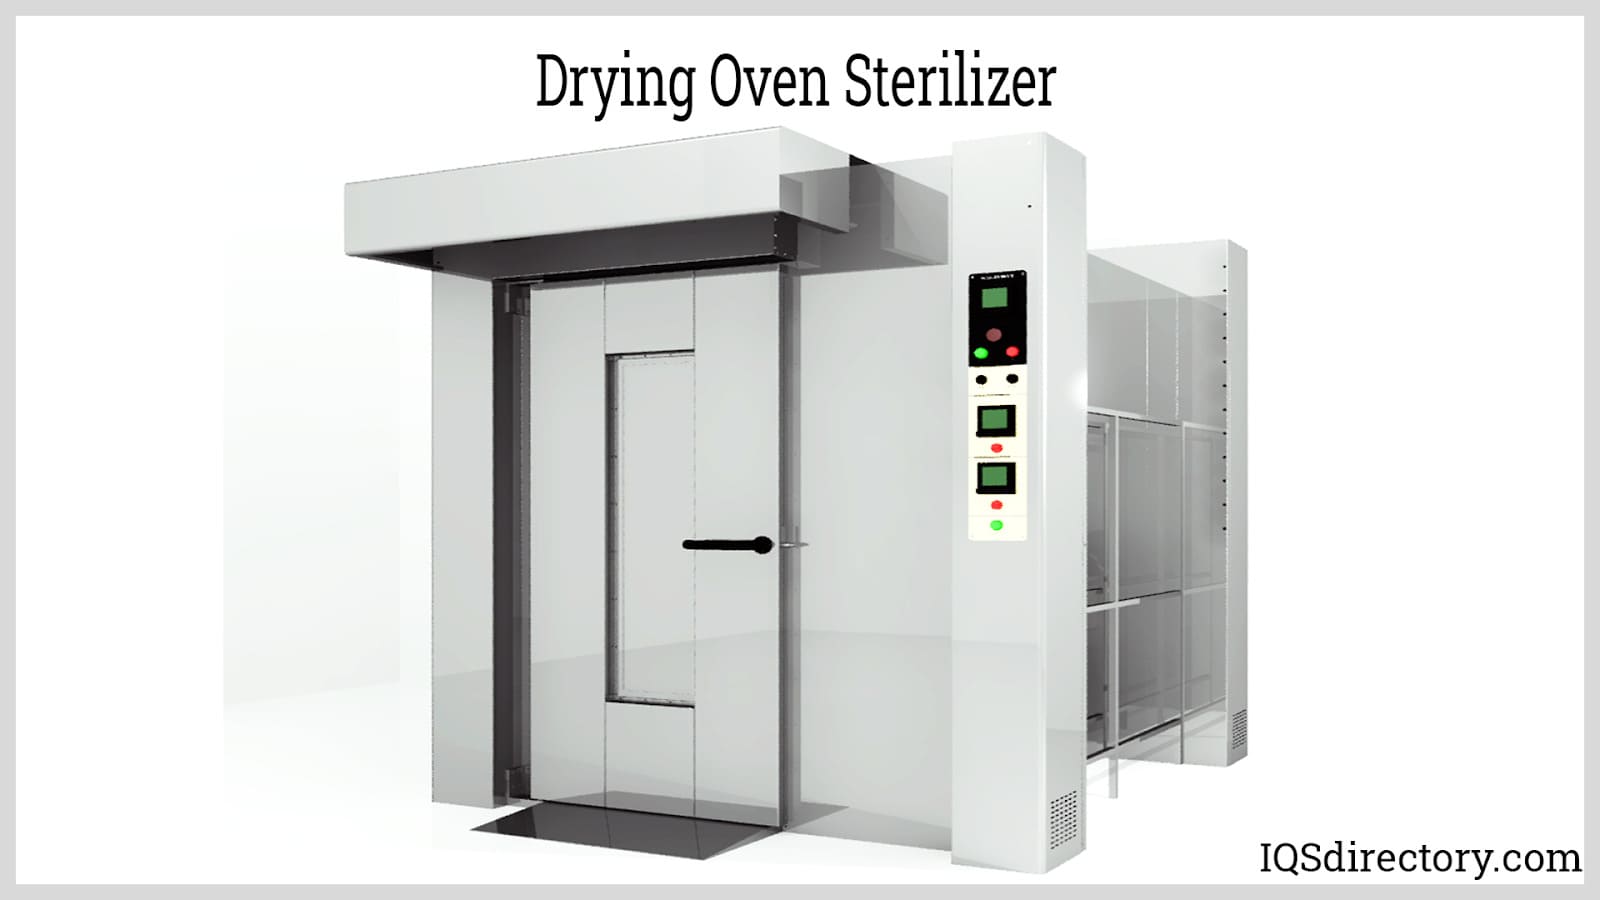 https://www.iqsdirectory.com/articles/industrial-oven/drying-oven-sterilizer.jpg